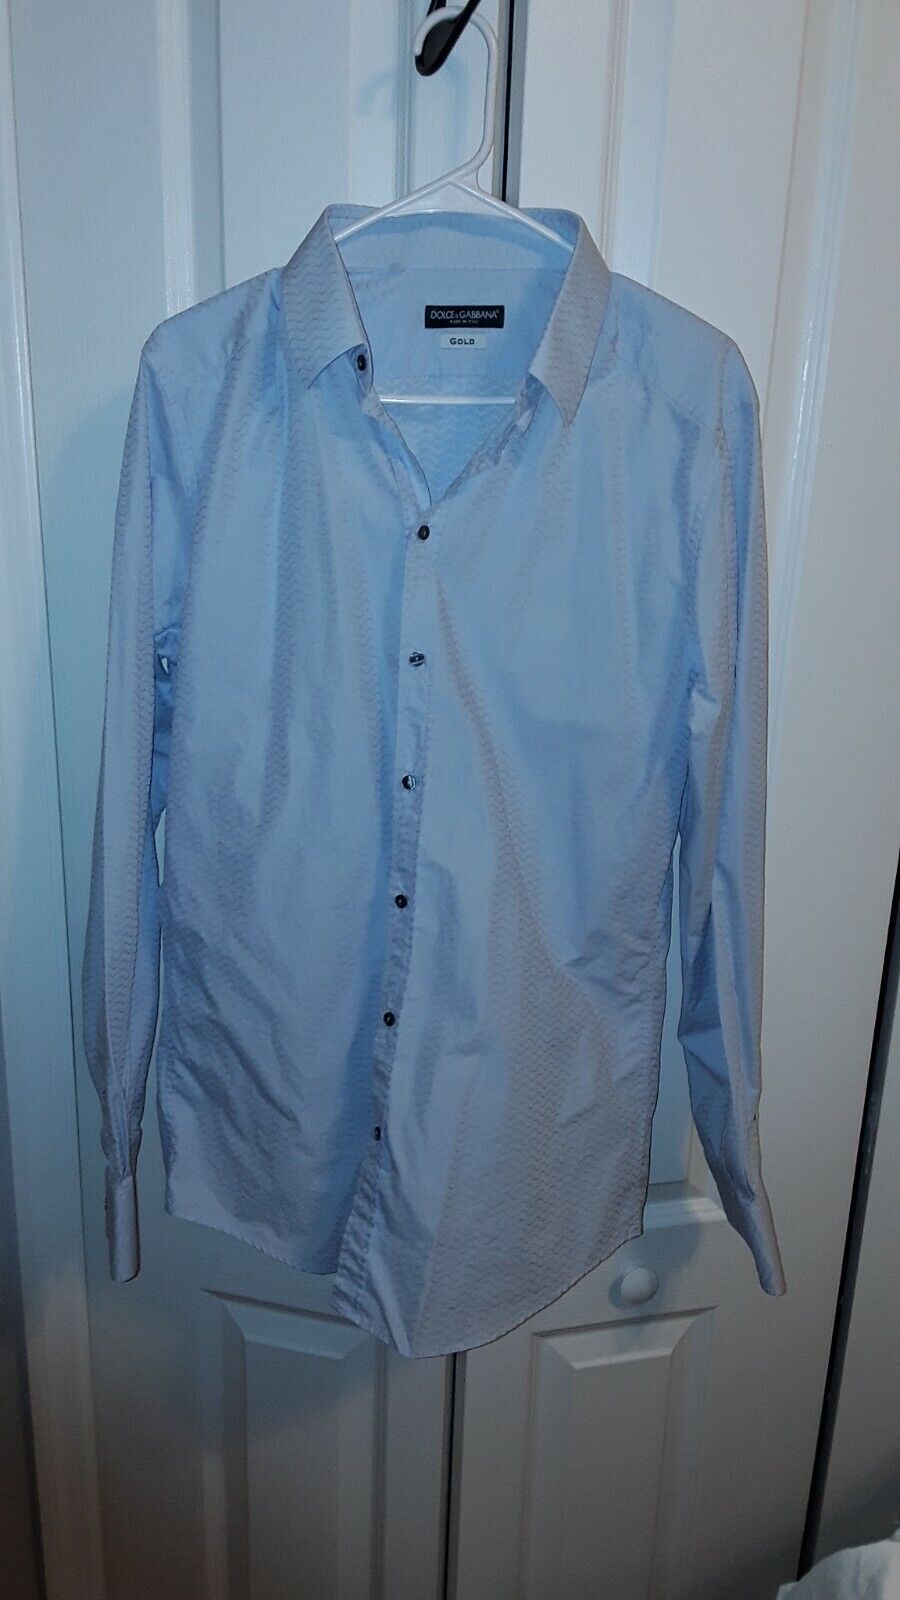 Dolce & Gabbana GOLD made in Italy Shirt 161/2 (42) Light Bluepre owned stunning